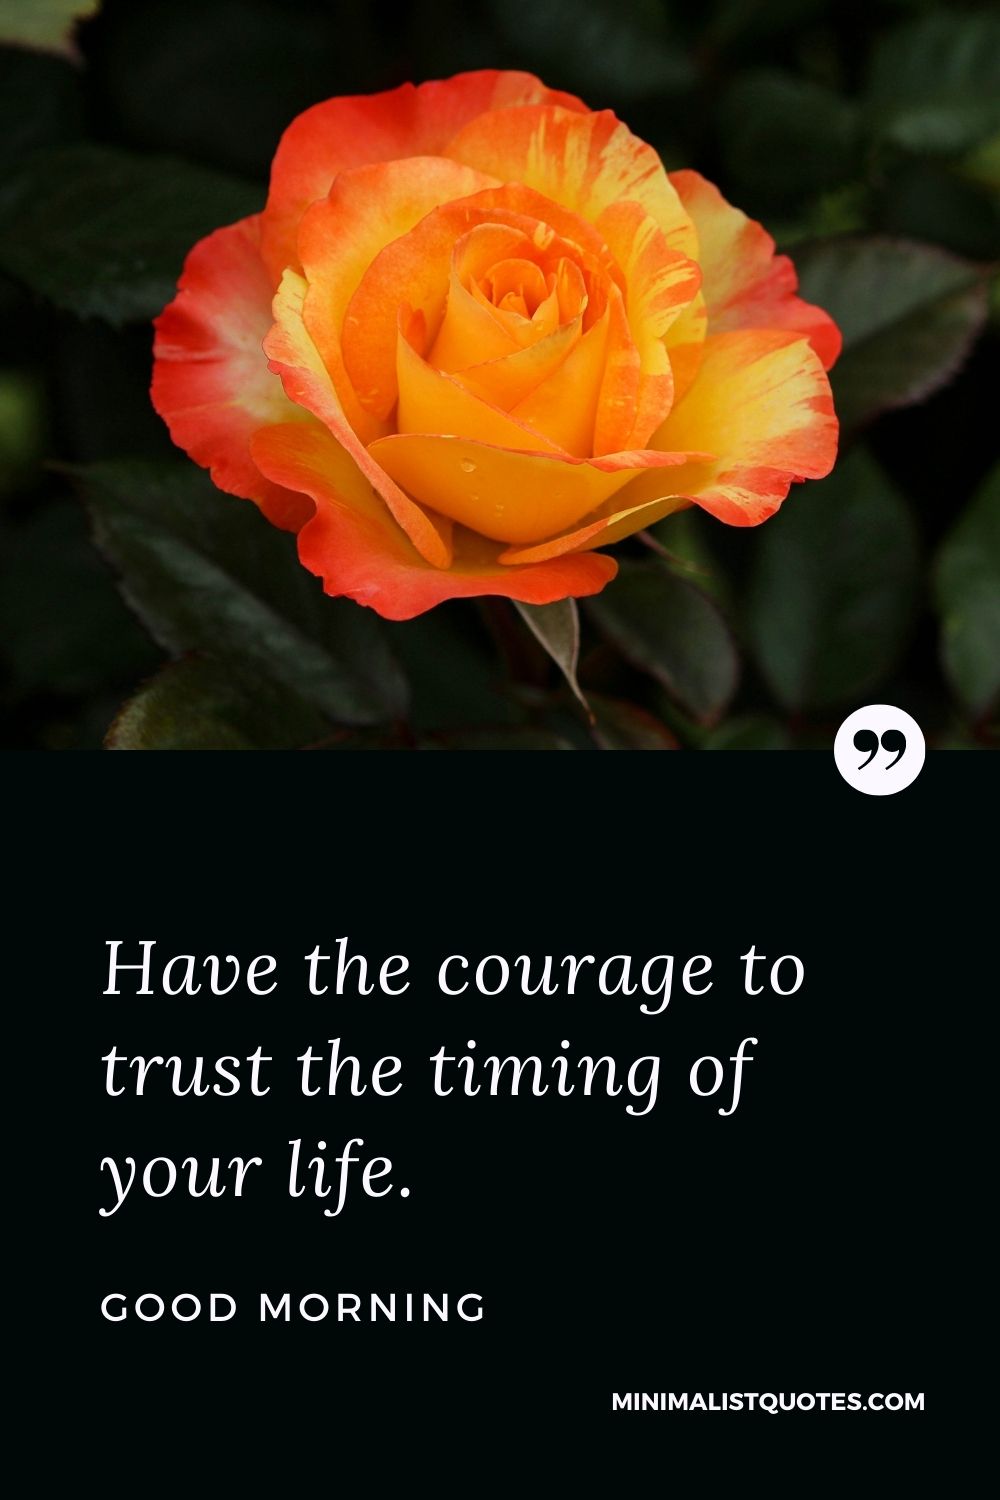 Good Morning Wish & Message With Image: Have the courage to trust the timing of your life.